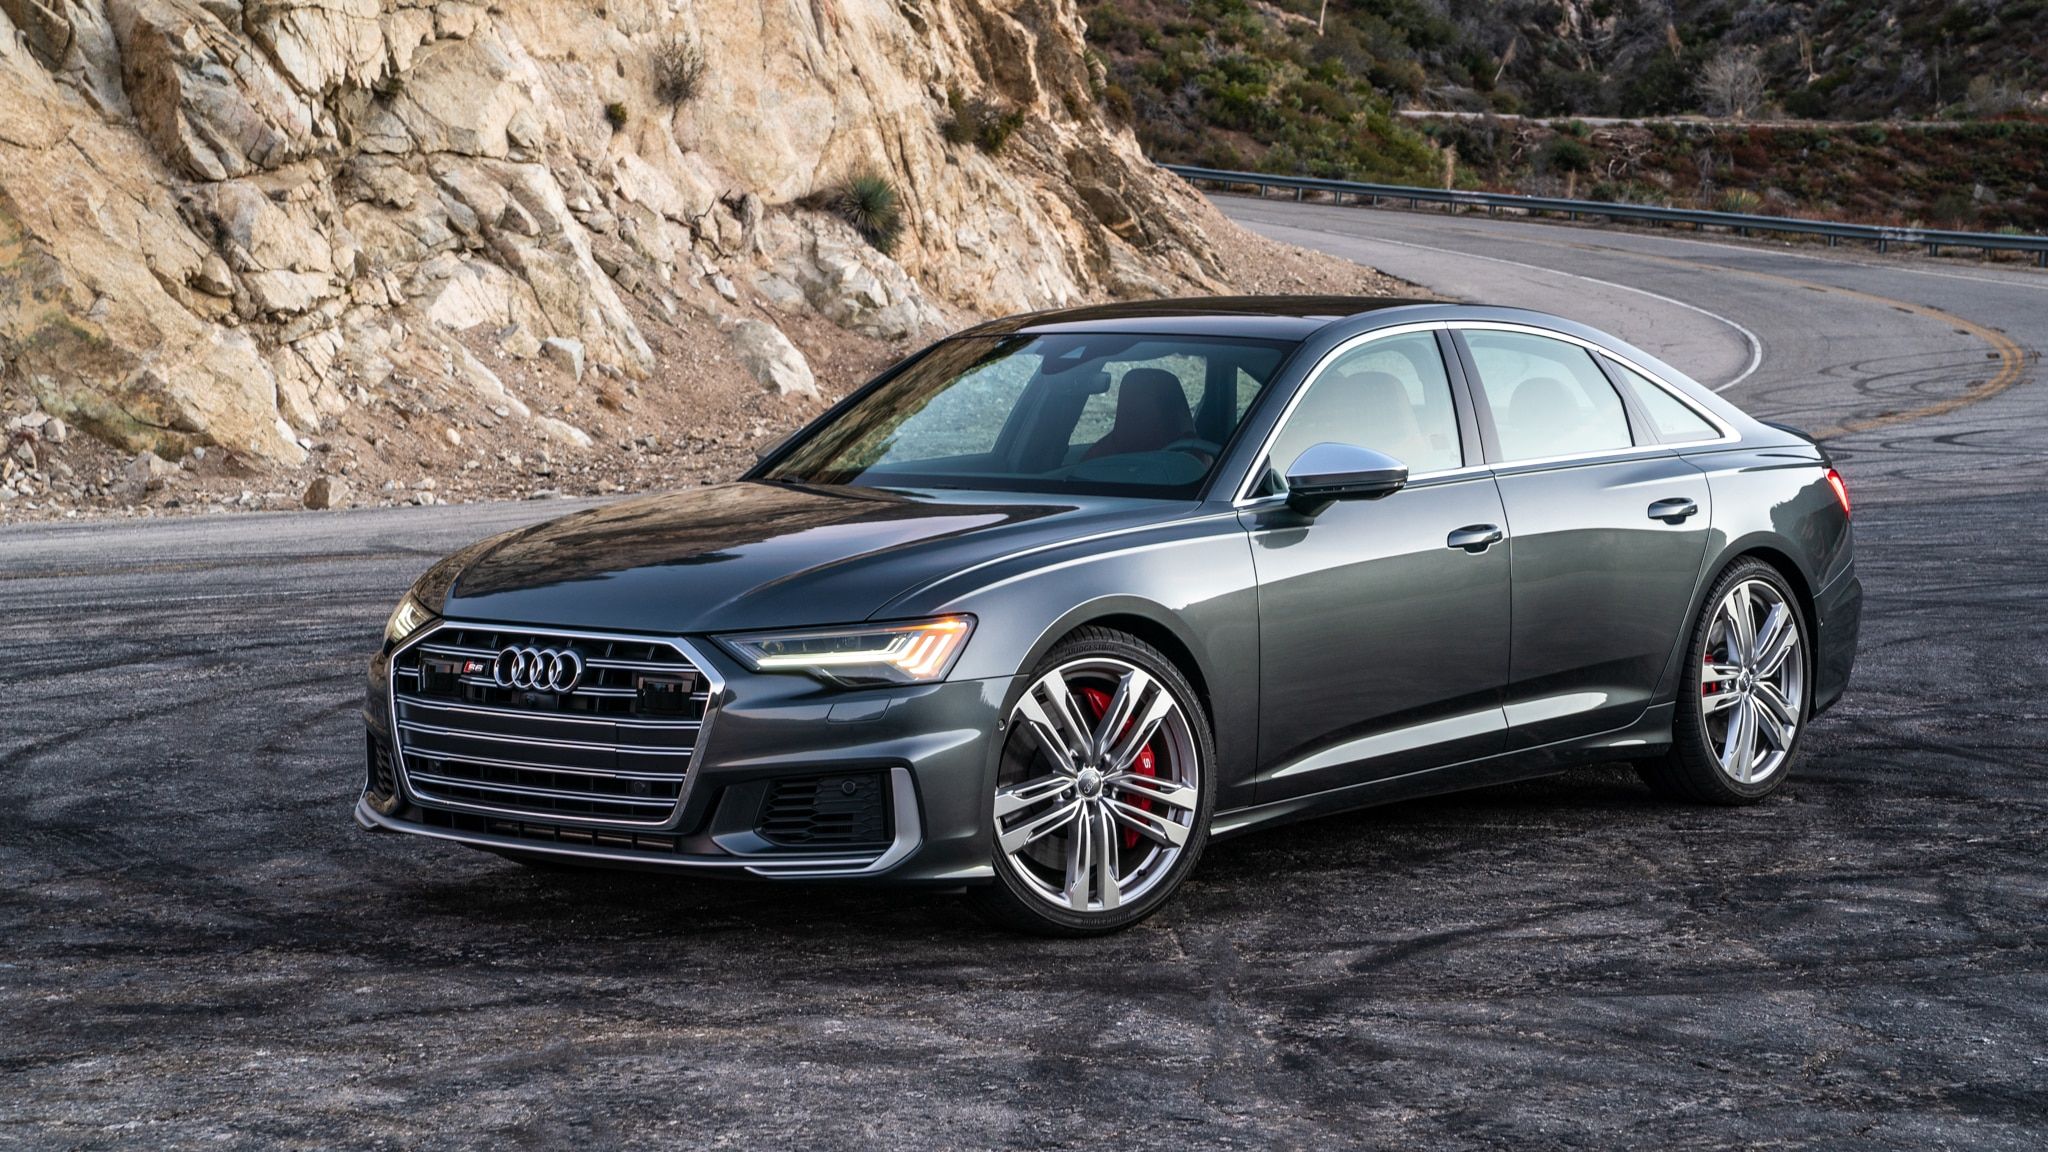 Test Drive: The 2020 Audi S6 Is the Lux Performance Sedan You Actually Want